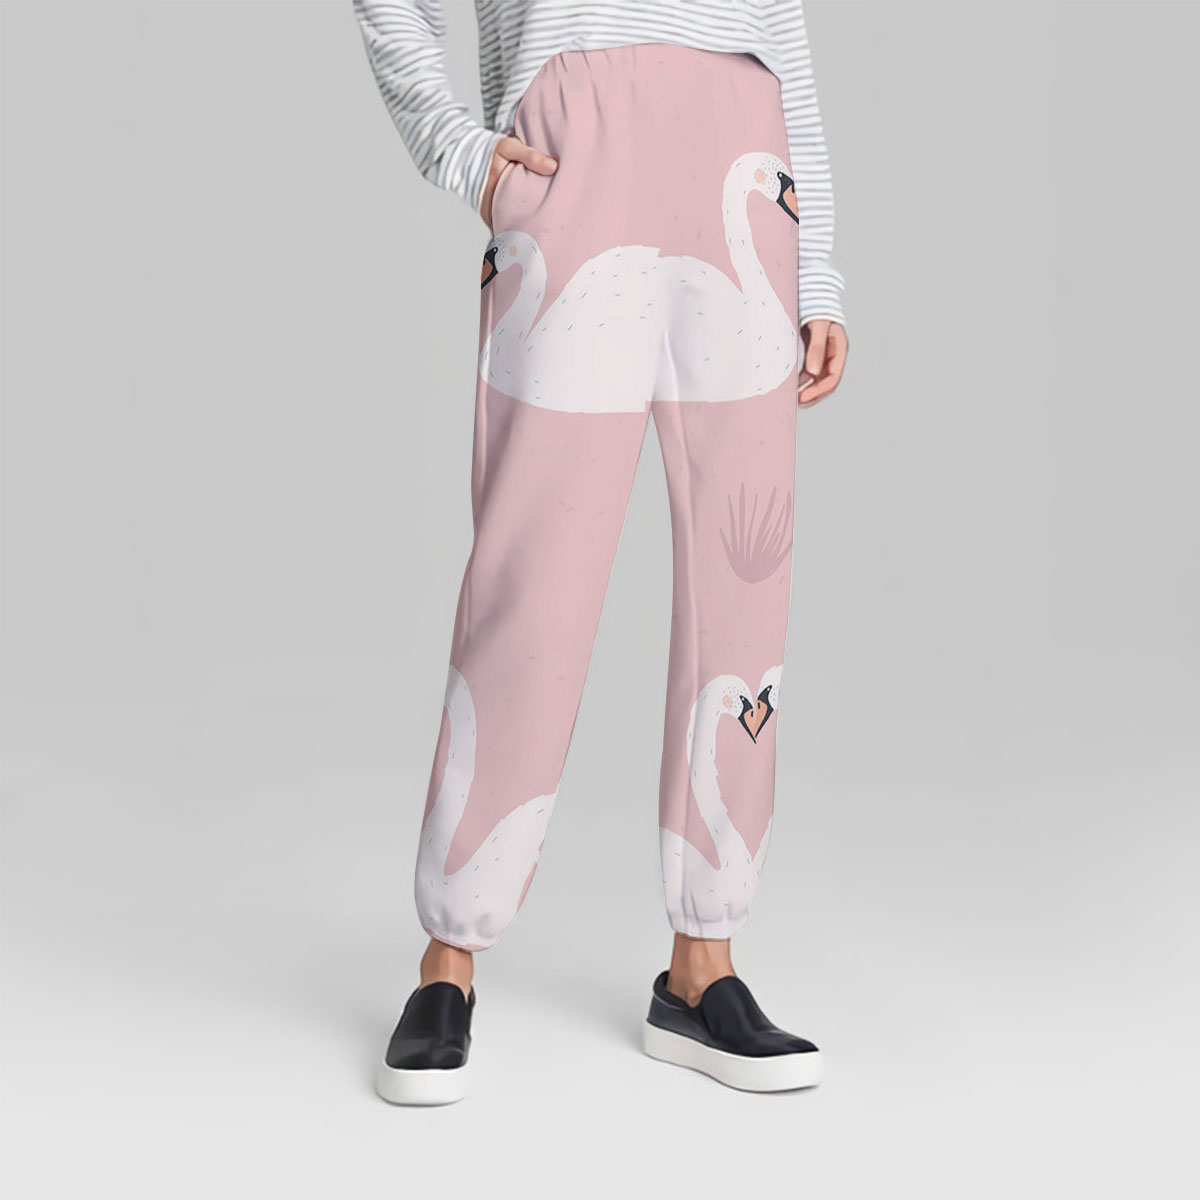 Lovely Swan Couple Sweatpant